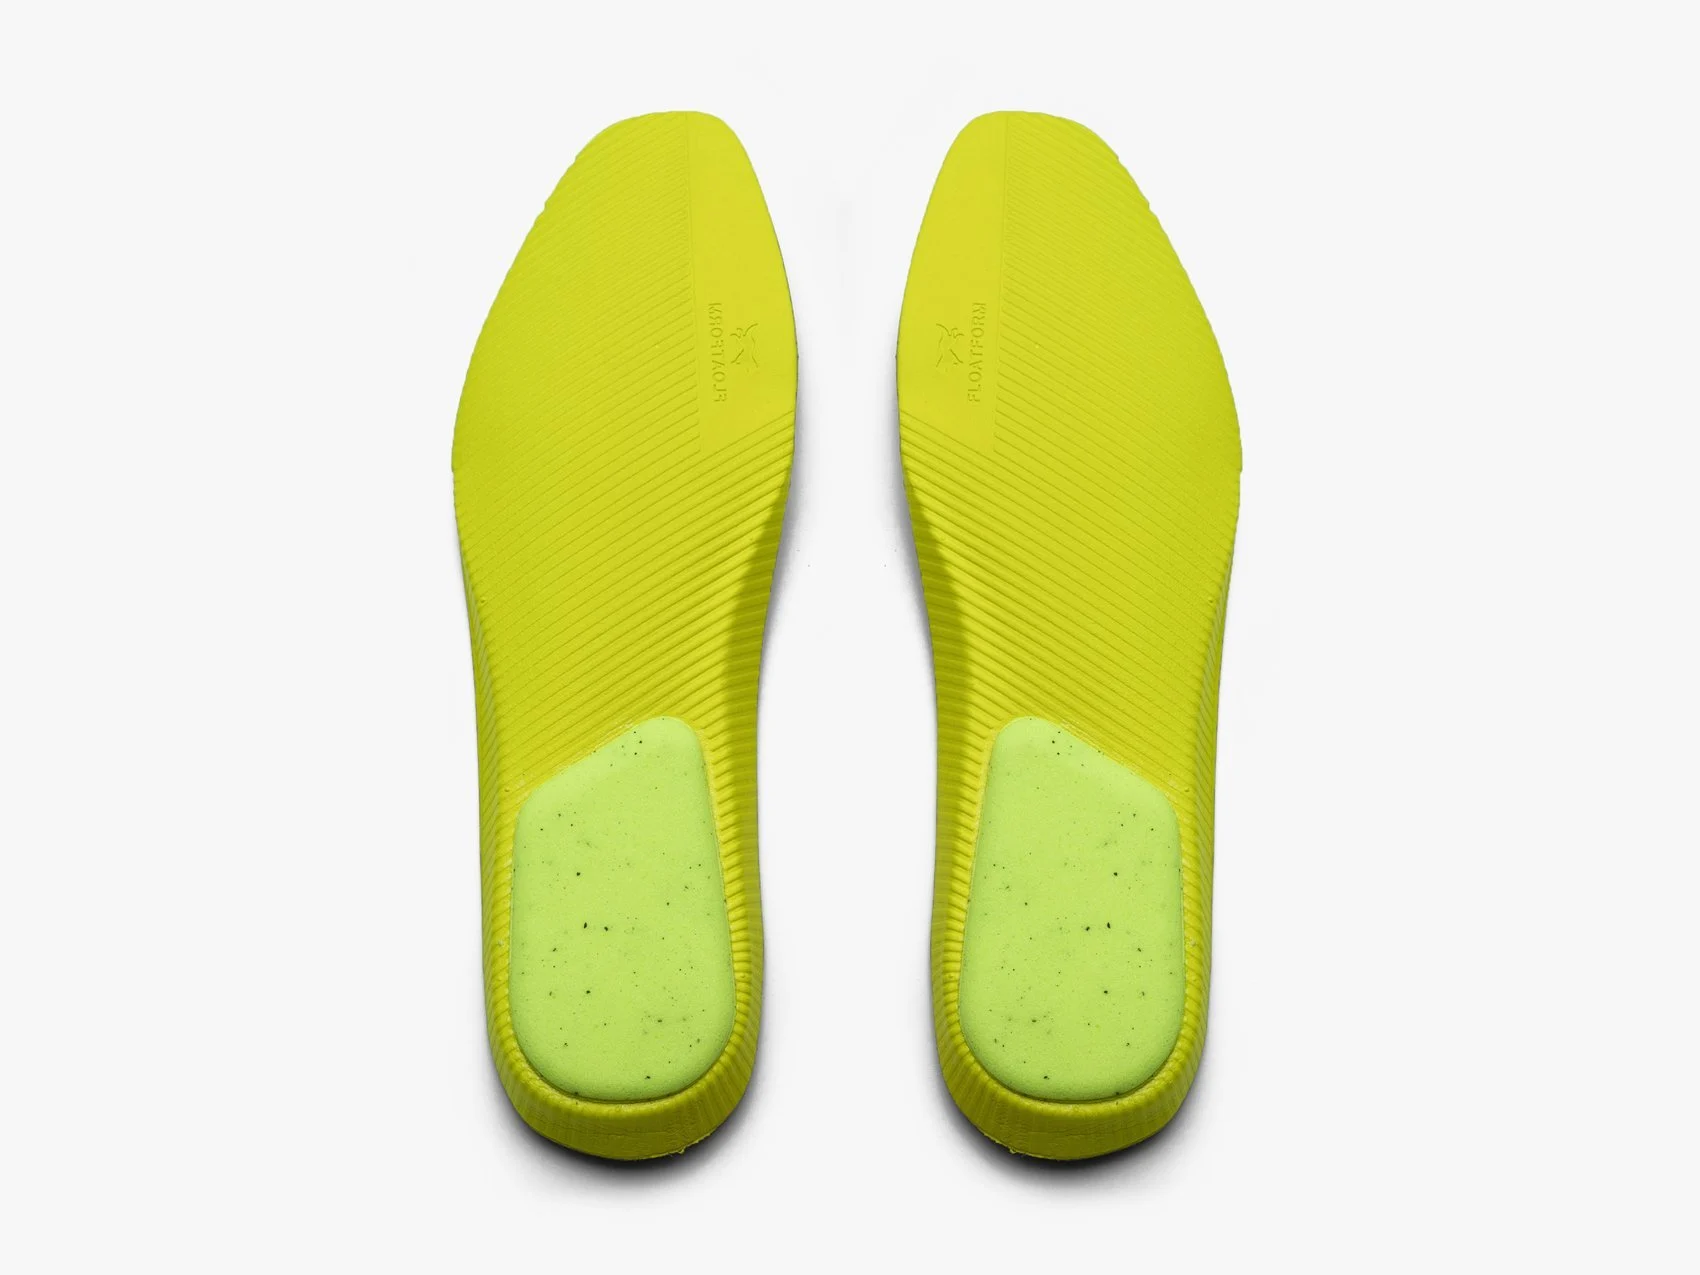 Detail view of a pair of yellow footbeds on a white background